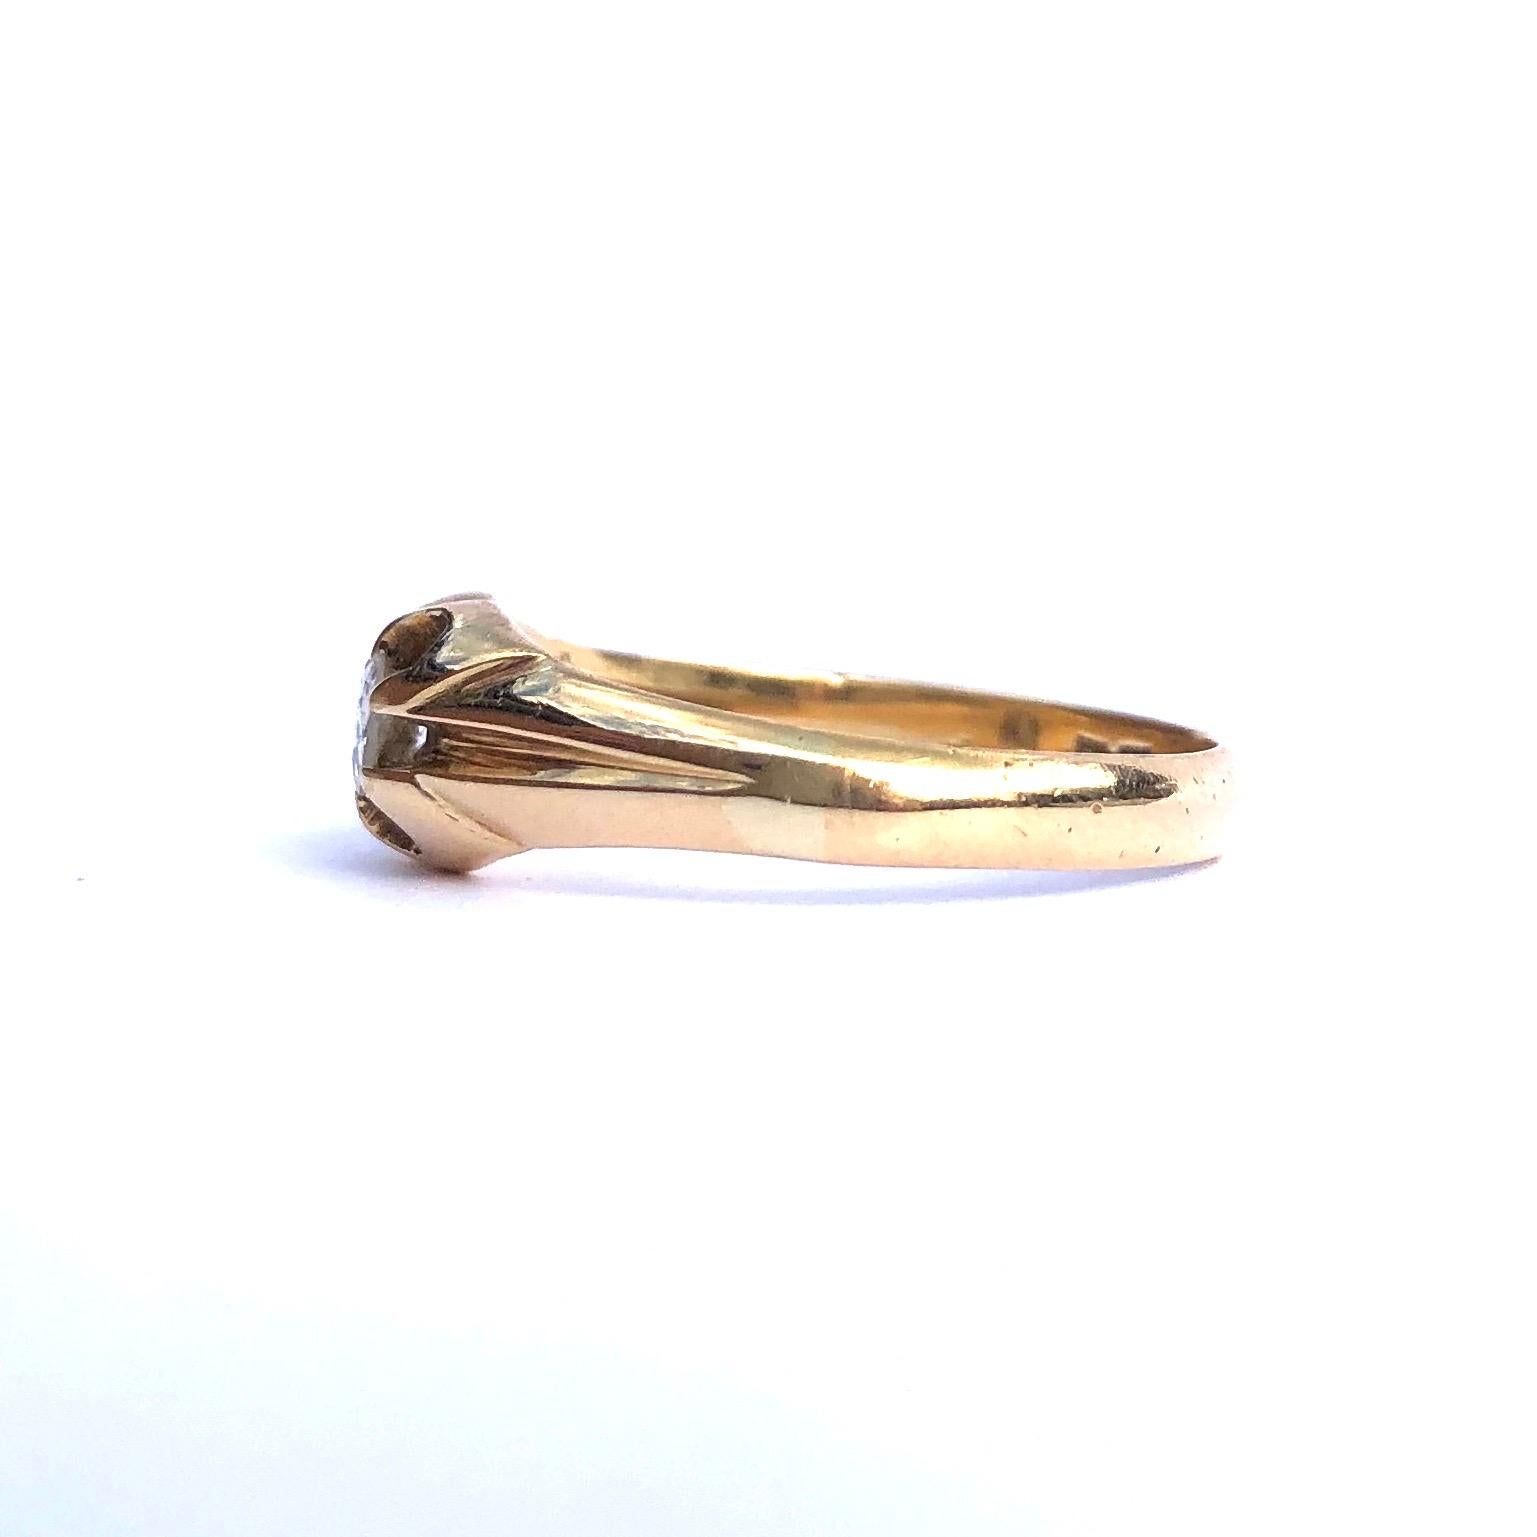 Set on this decorative setting within this glossy 18ct gold band is a 20pt diamond. The diamond is bright and very sparkly and is old European cut. Made in London, England. 

Ring Size: Q or 8 1/4
Band Width: 6mm

Weight: 3.36g